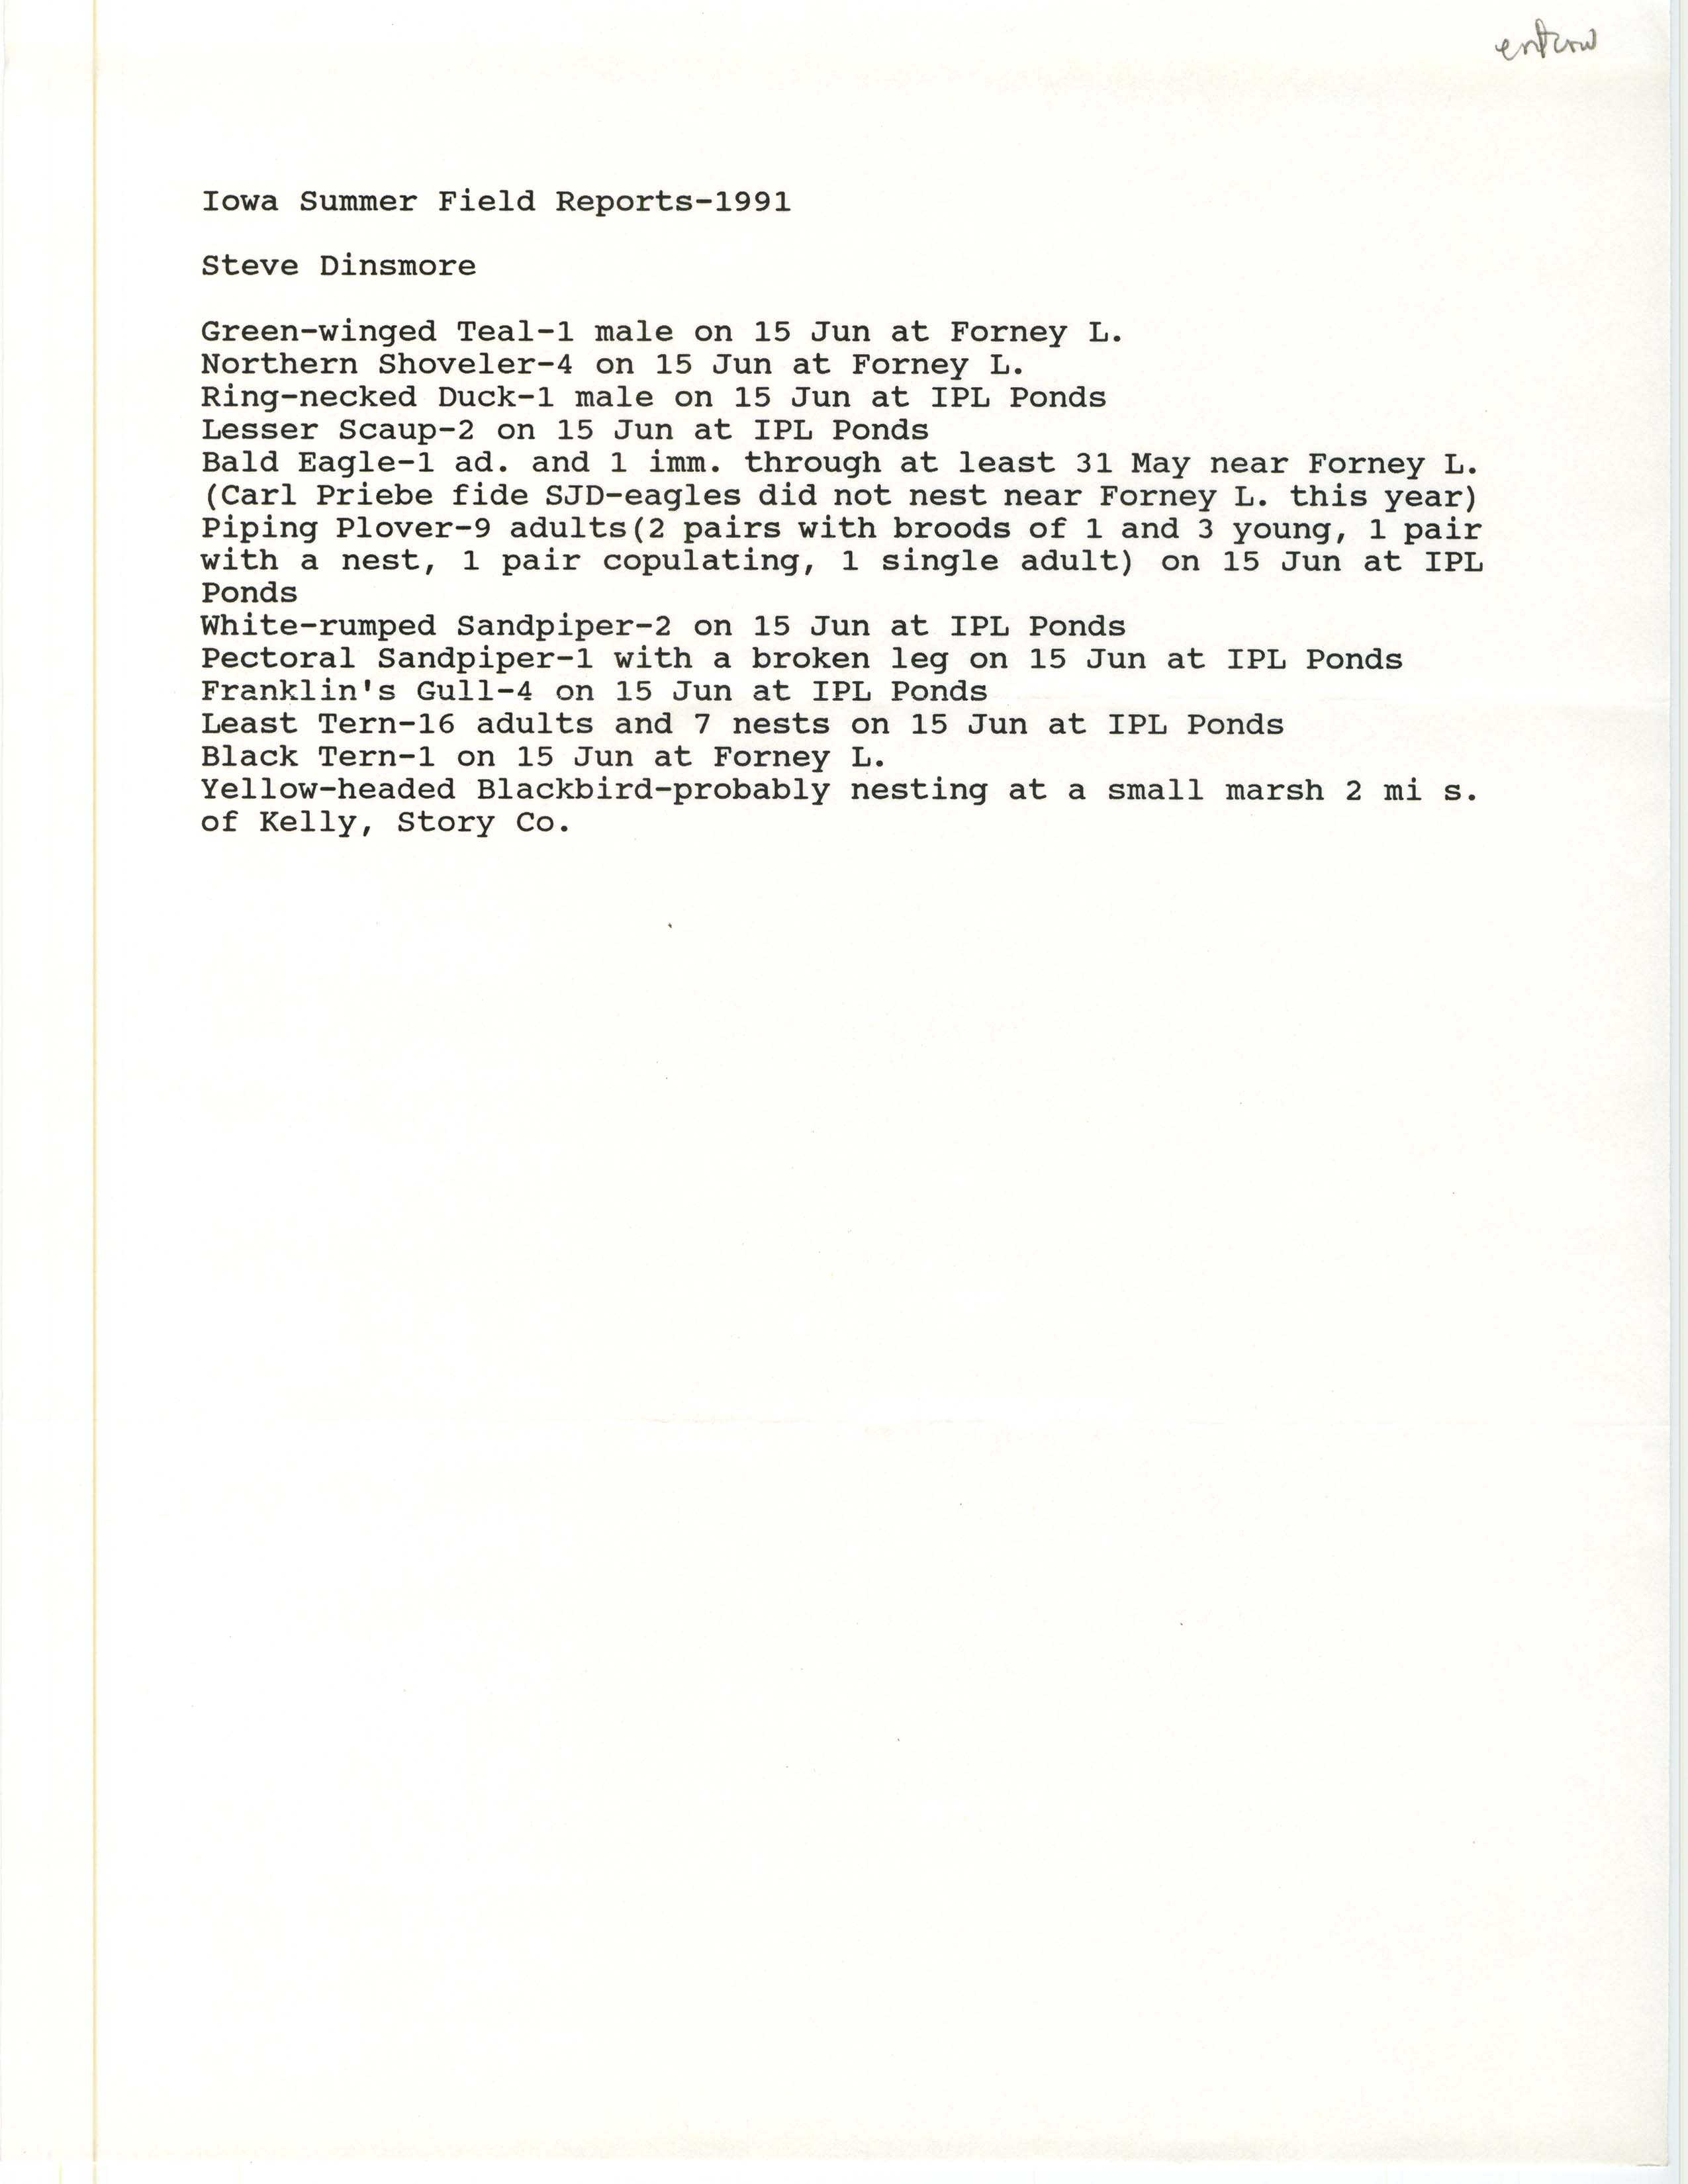 Field notes contributed by Stephen J. Dinsmore, summer 1991